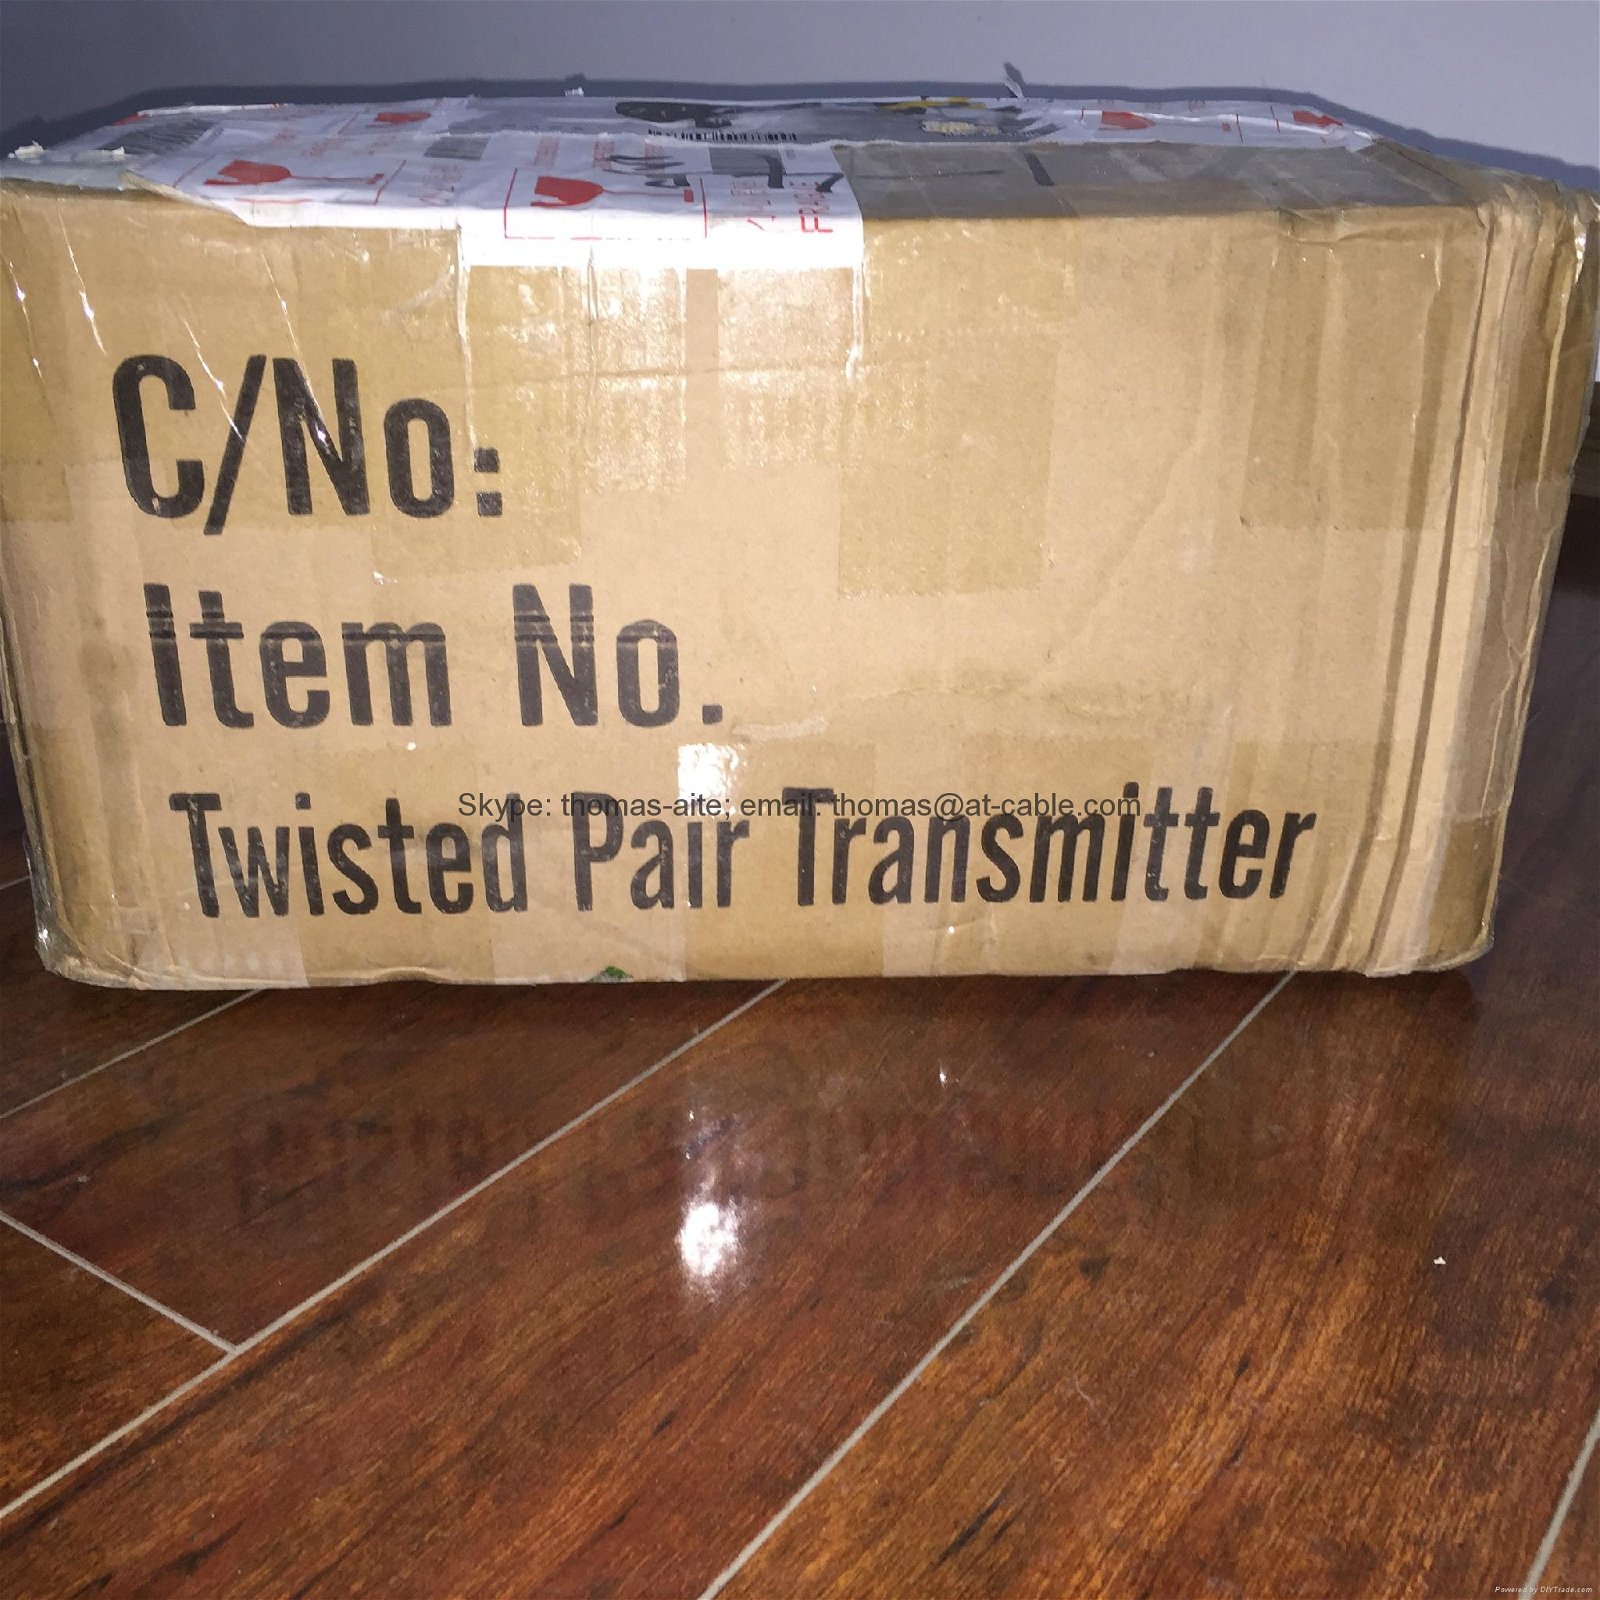 twisted pair transmitter